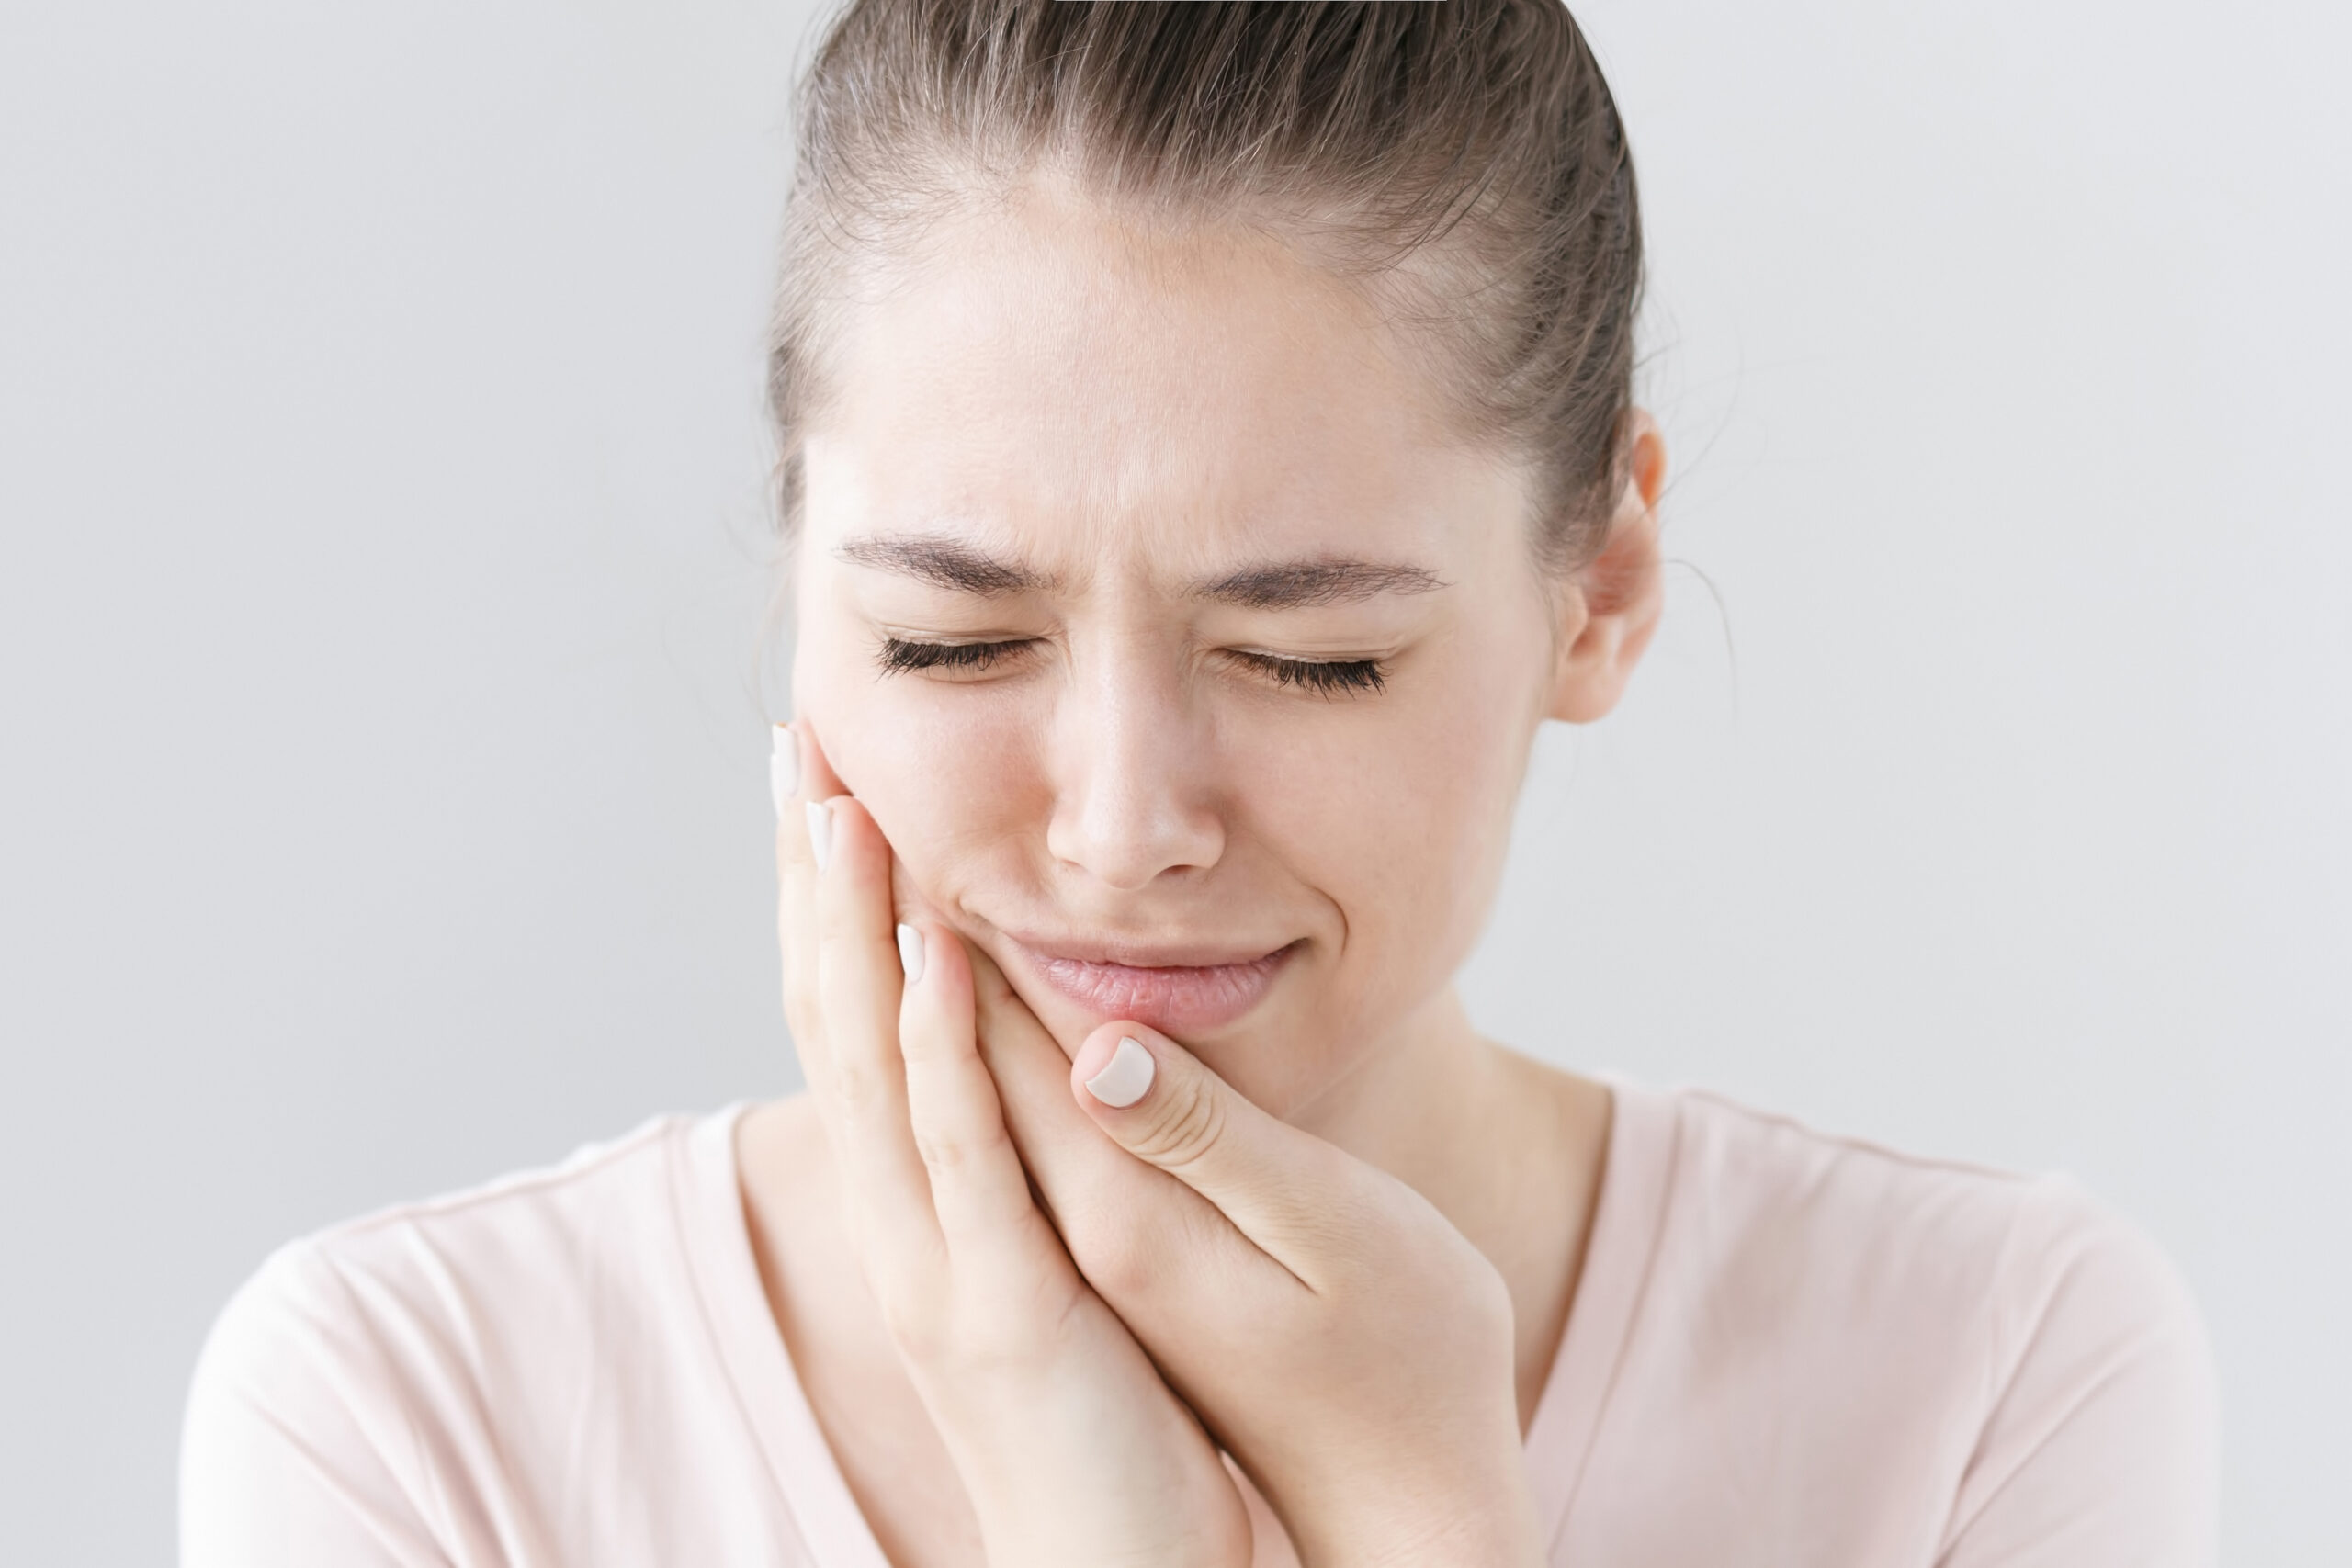 How to Relieve Tooth Pain Fast in Kids and Adults at Home?